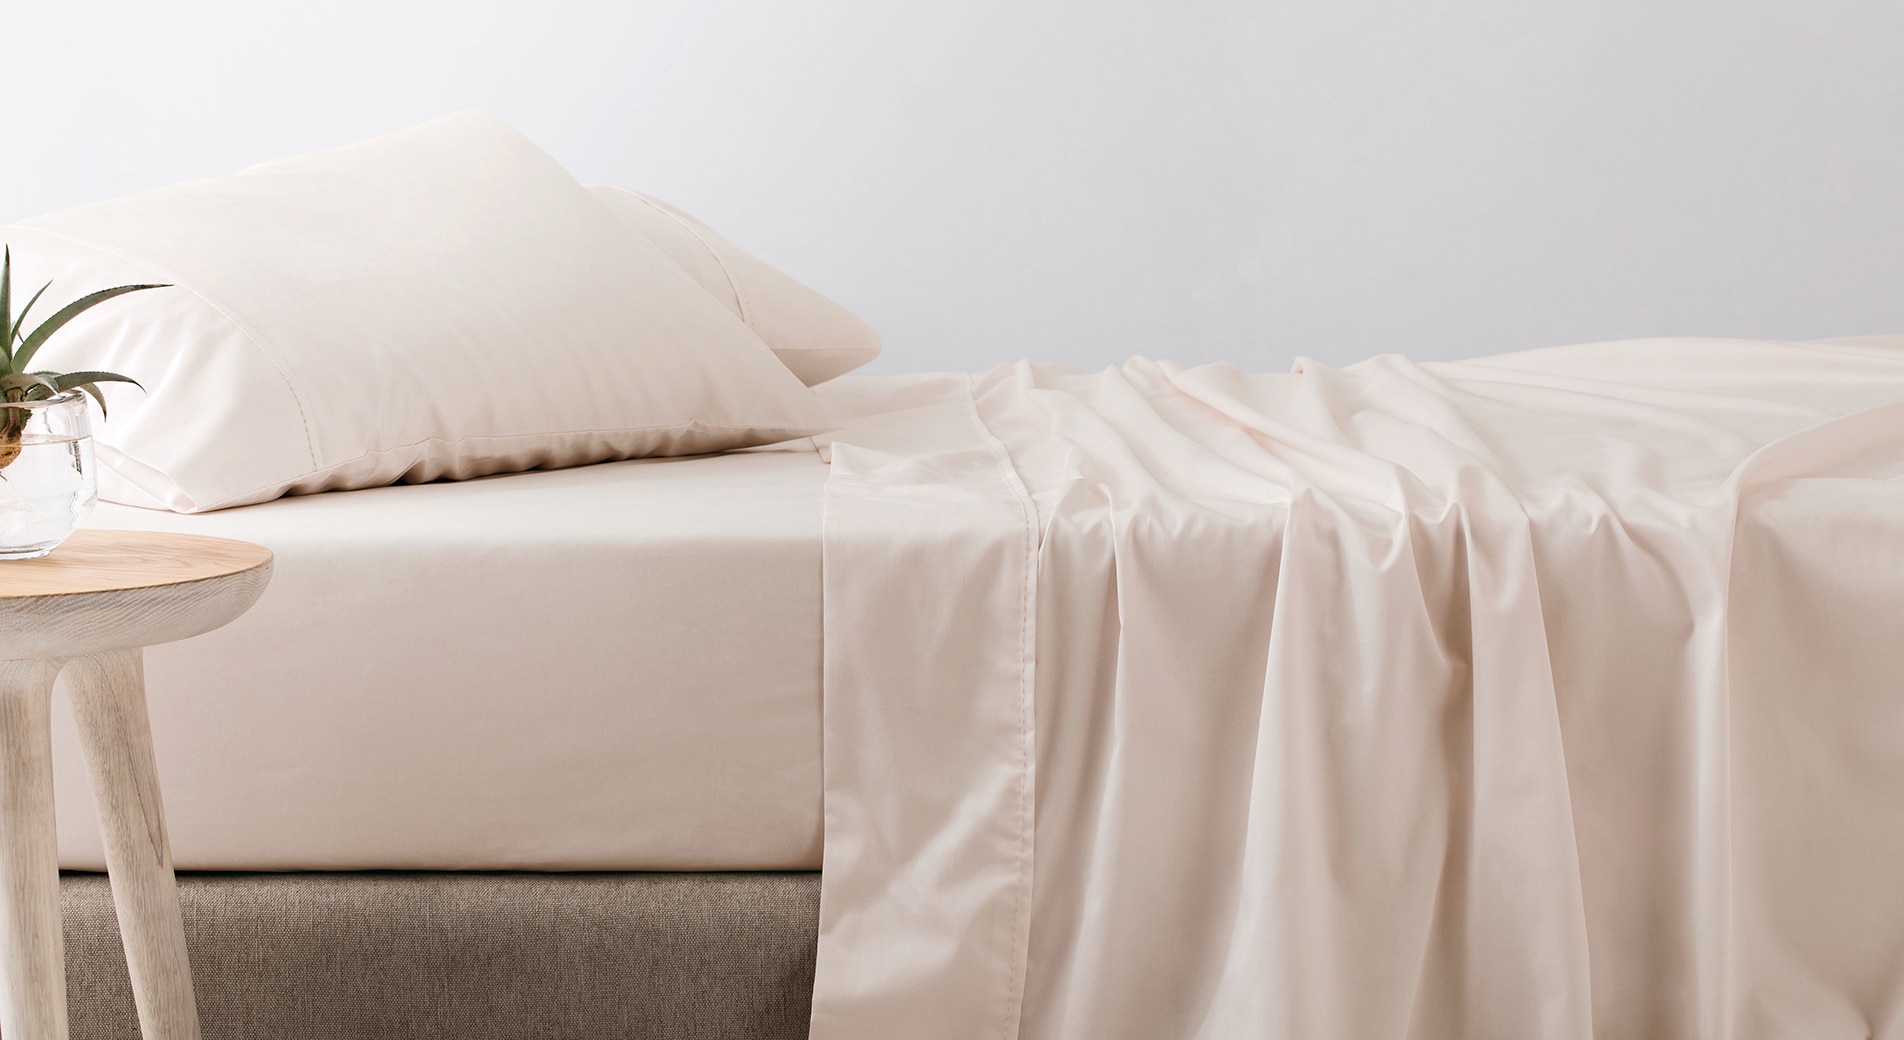 A Comprehensive Comparison: Tencel vs Percale vs Sateen - Which Fabric Is the Best for Your Sheets? 2